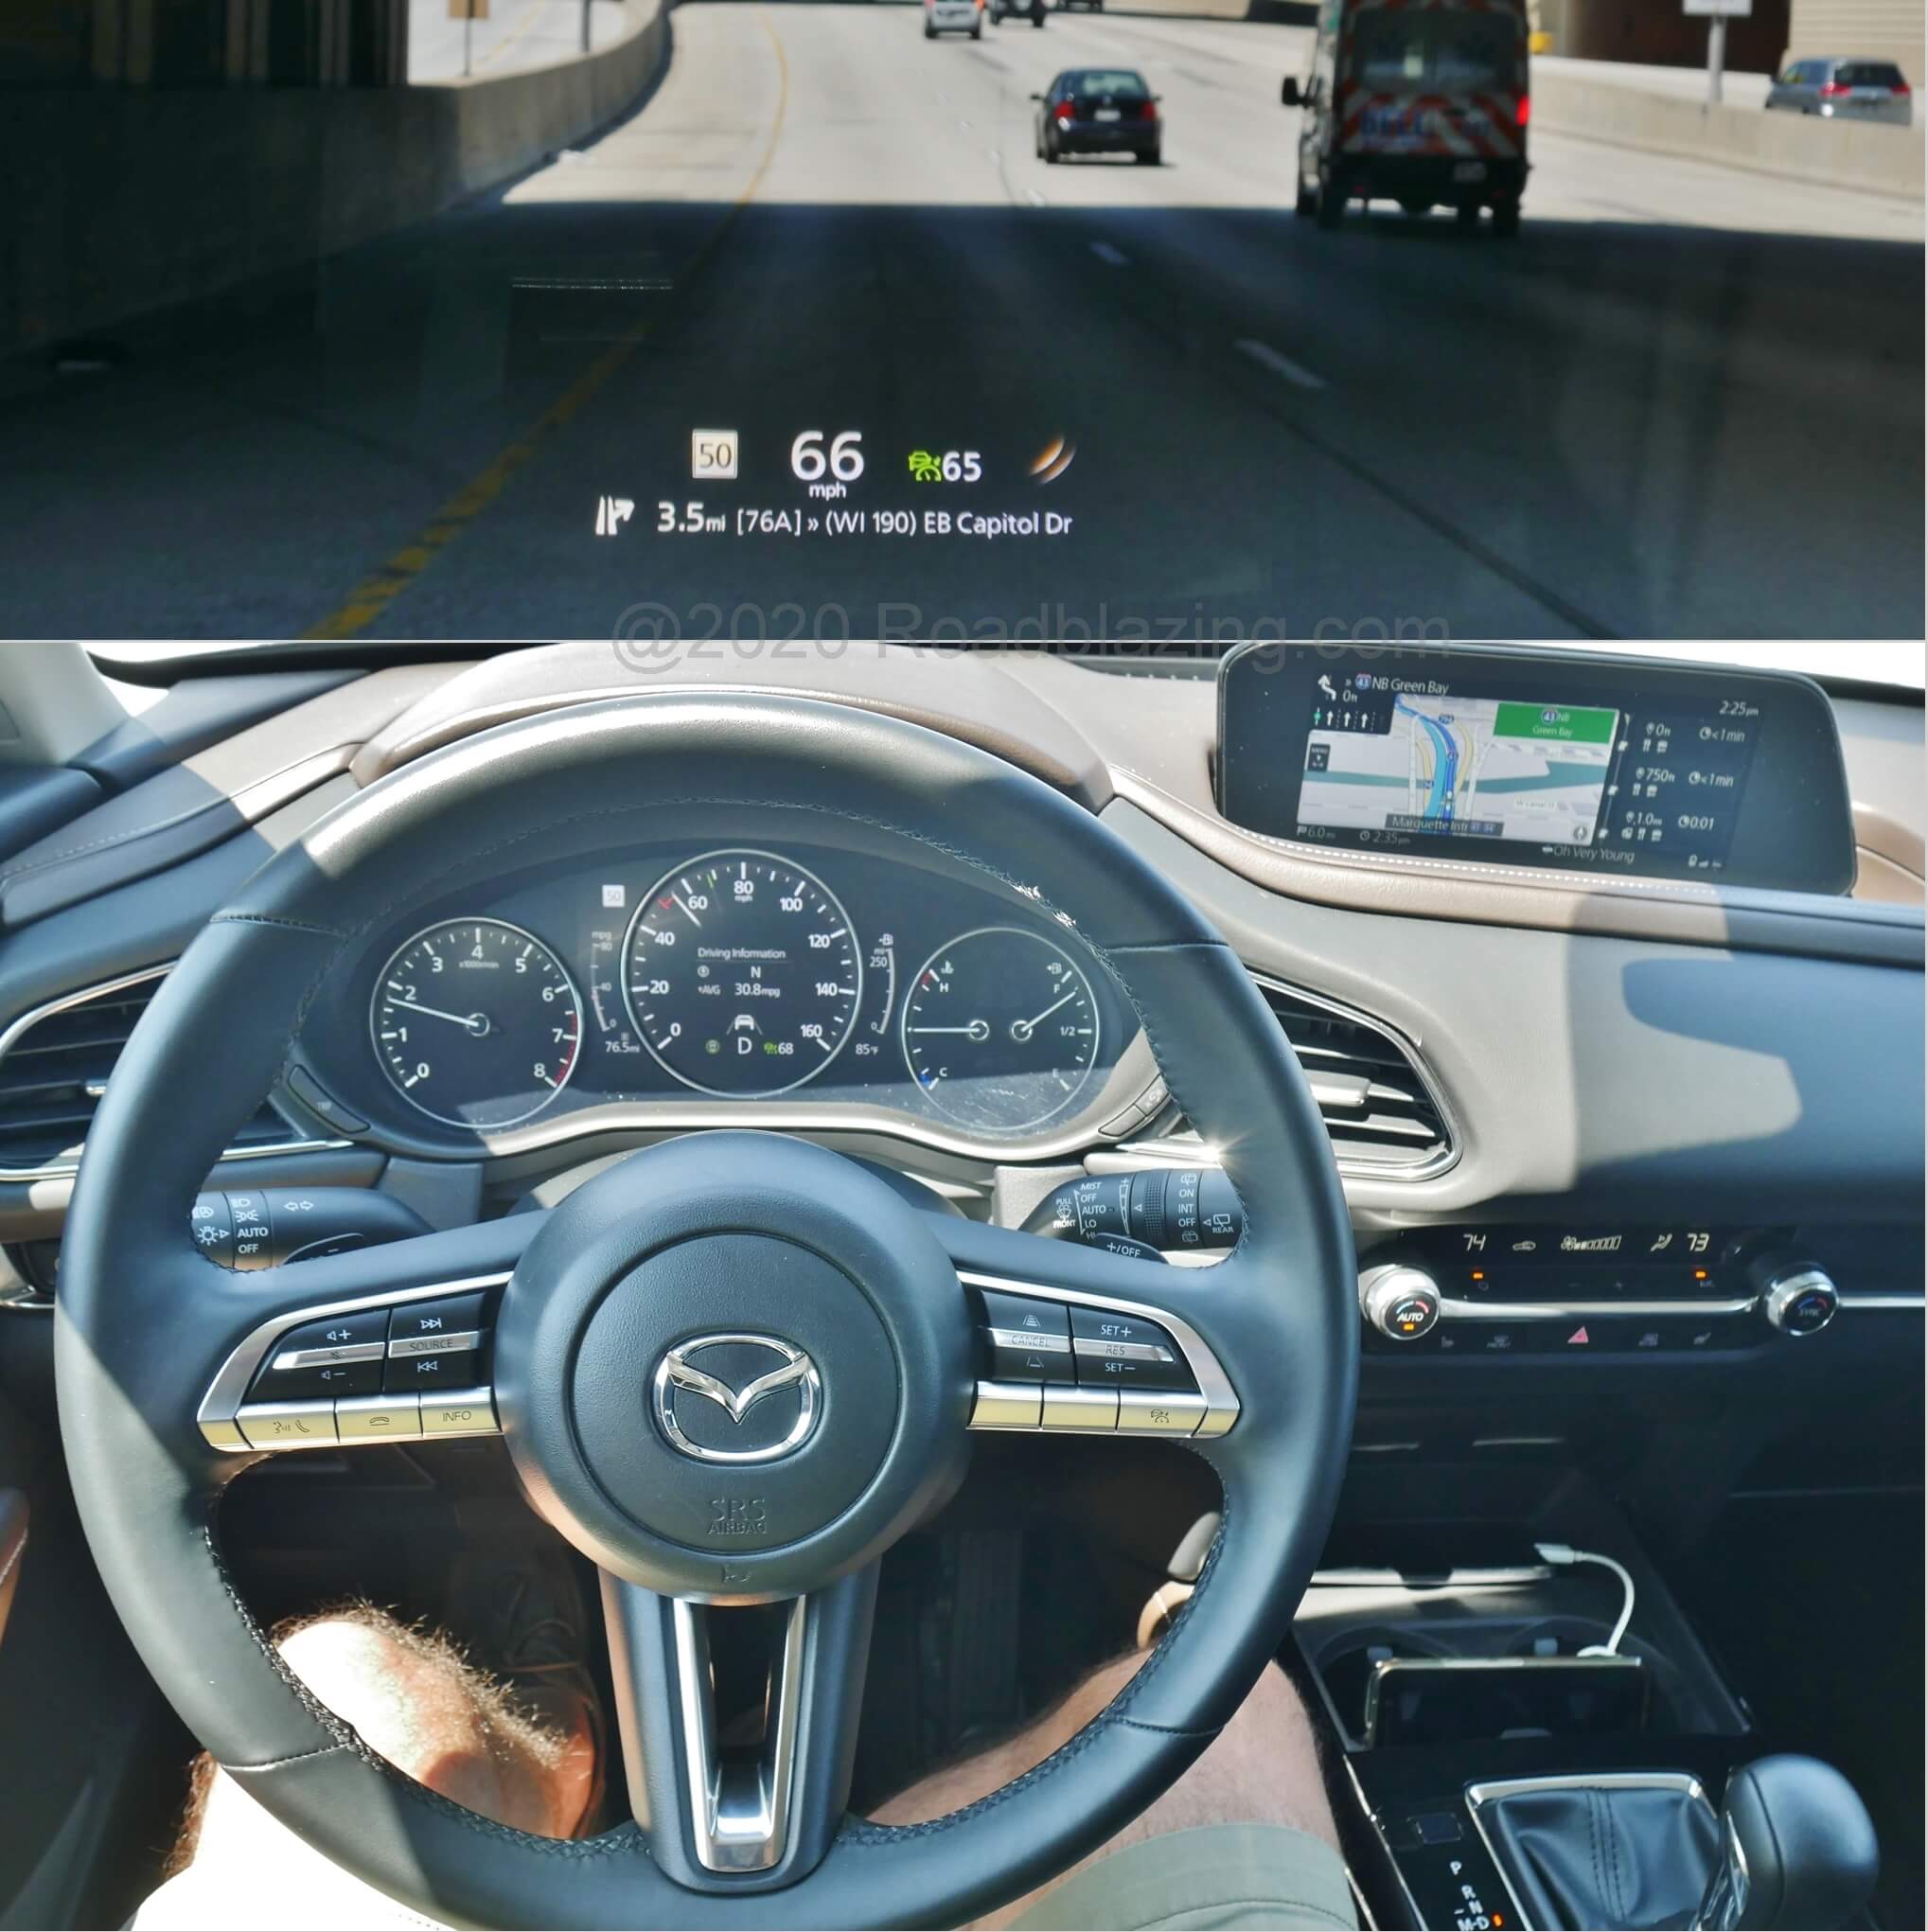 2020 Mazda CX-30 Premium AWD: On the road with HDD GPS navigation and color HUD